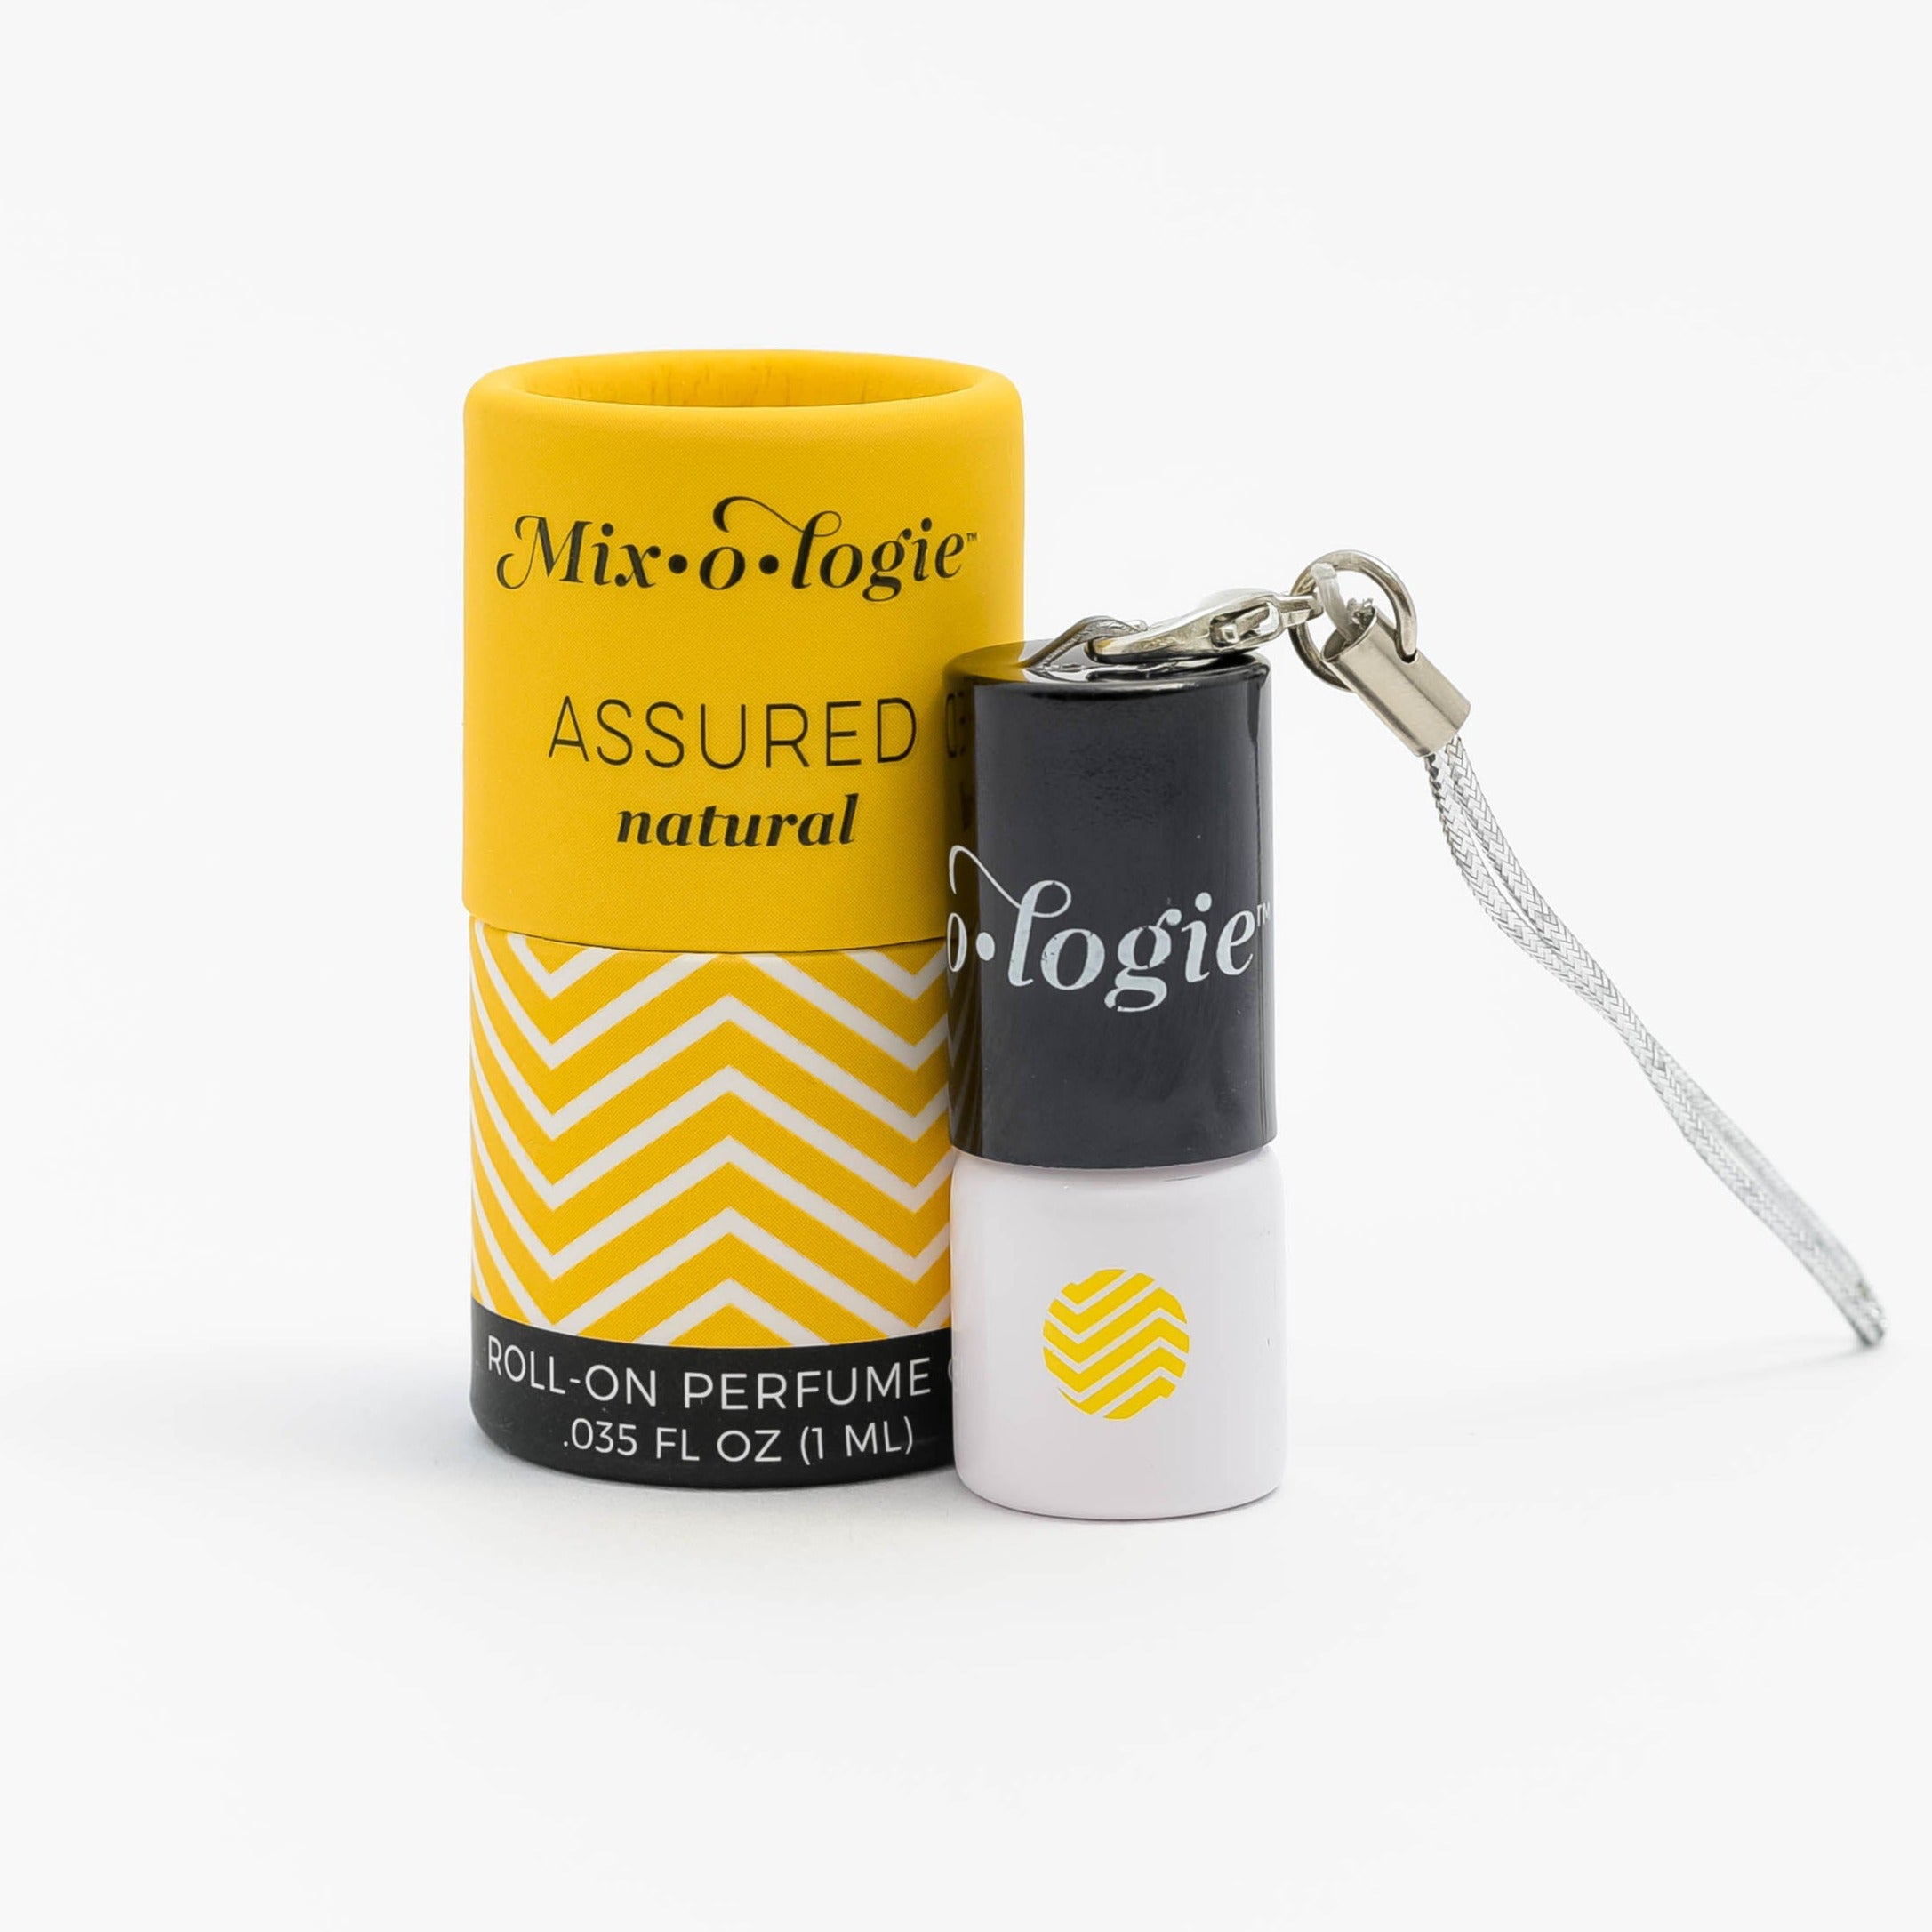 Mixologie's Assured (Natural) scented mini rollerball in 1 mL bottle with keychain lid. Displayed with yellow and white cylinder packaging.